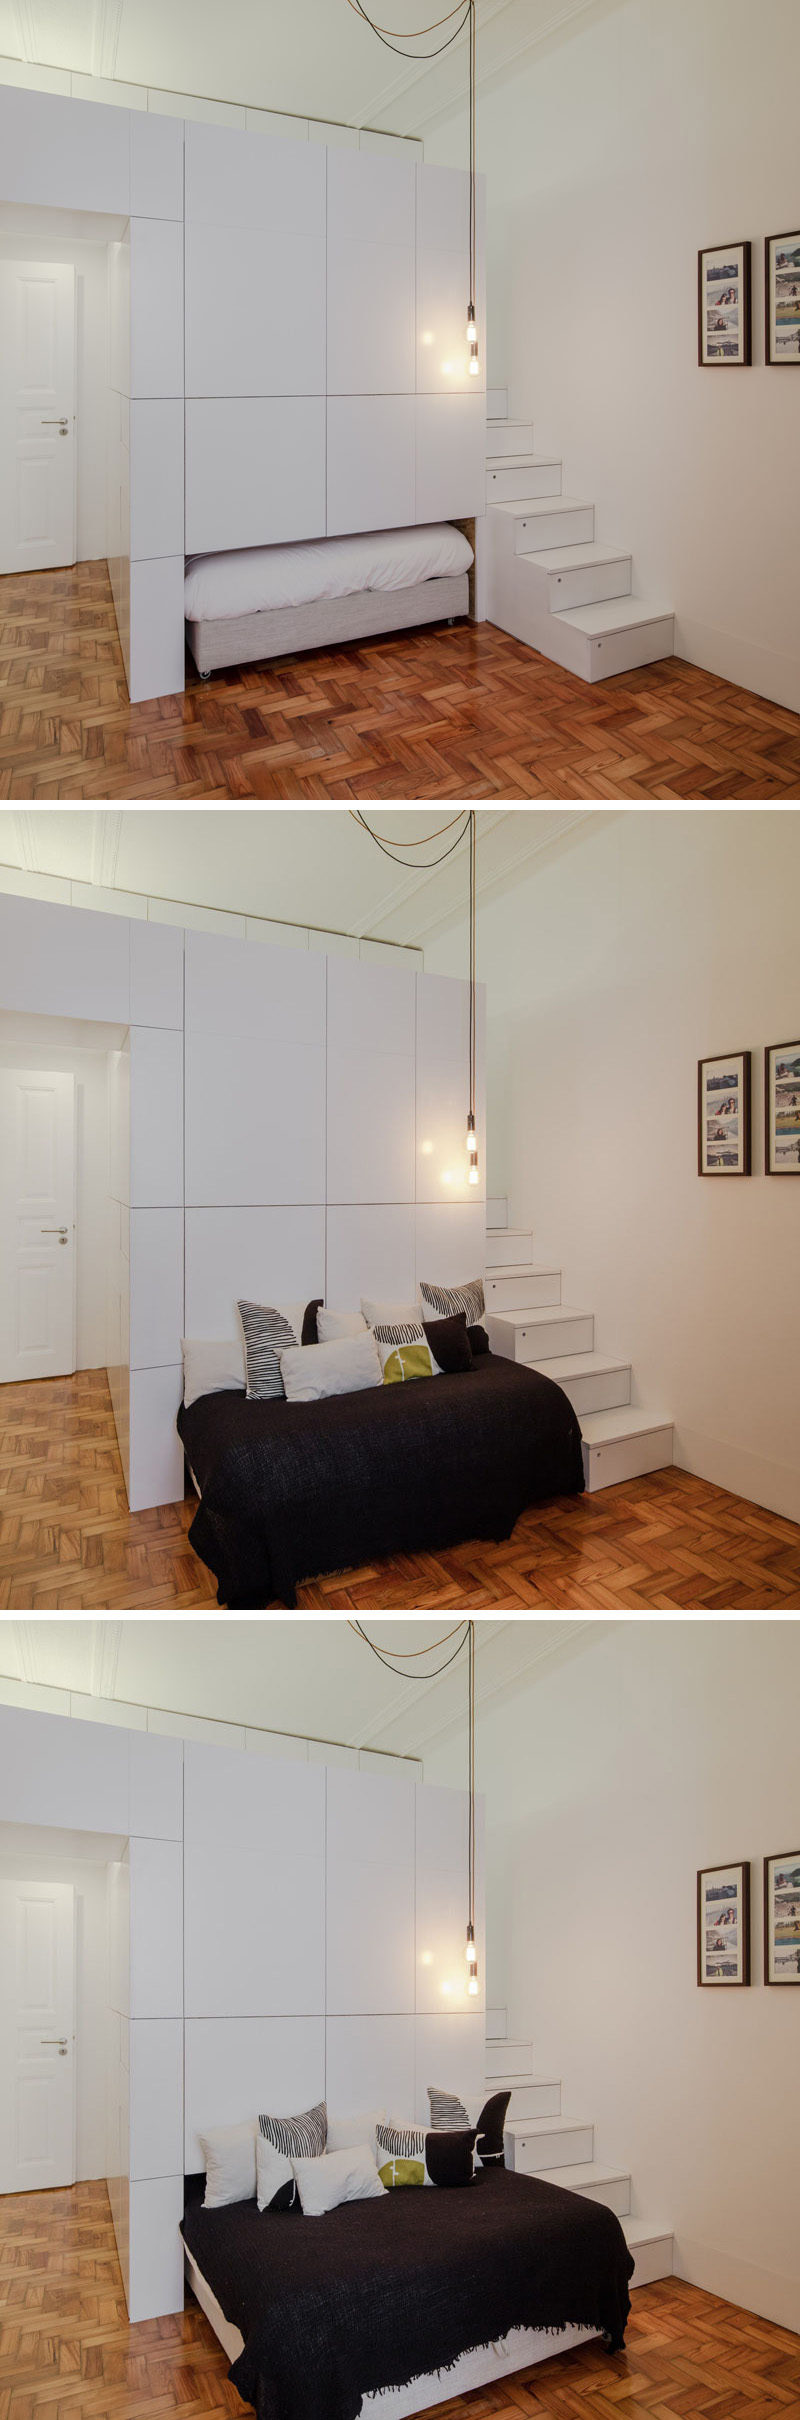 This small modern apartment has a wall of white storage cabinets that allows a pull-out bed to be hidden within it. Depending on how much you pull the bed out, it can also double as a couch or day bed.